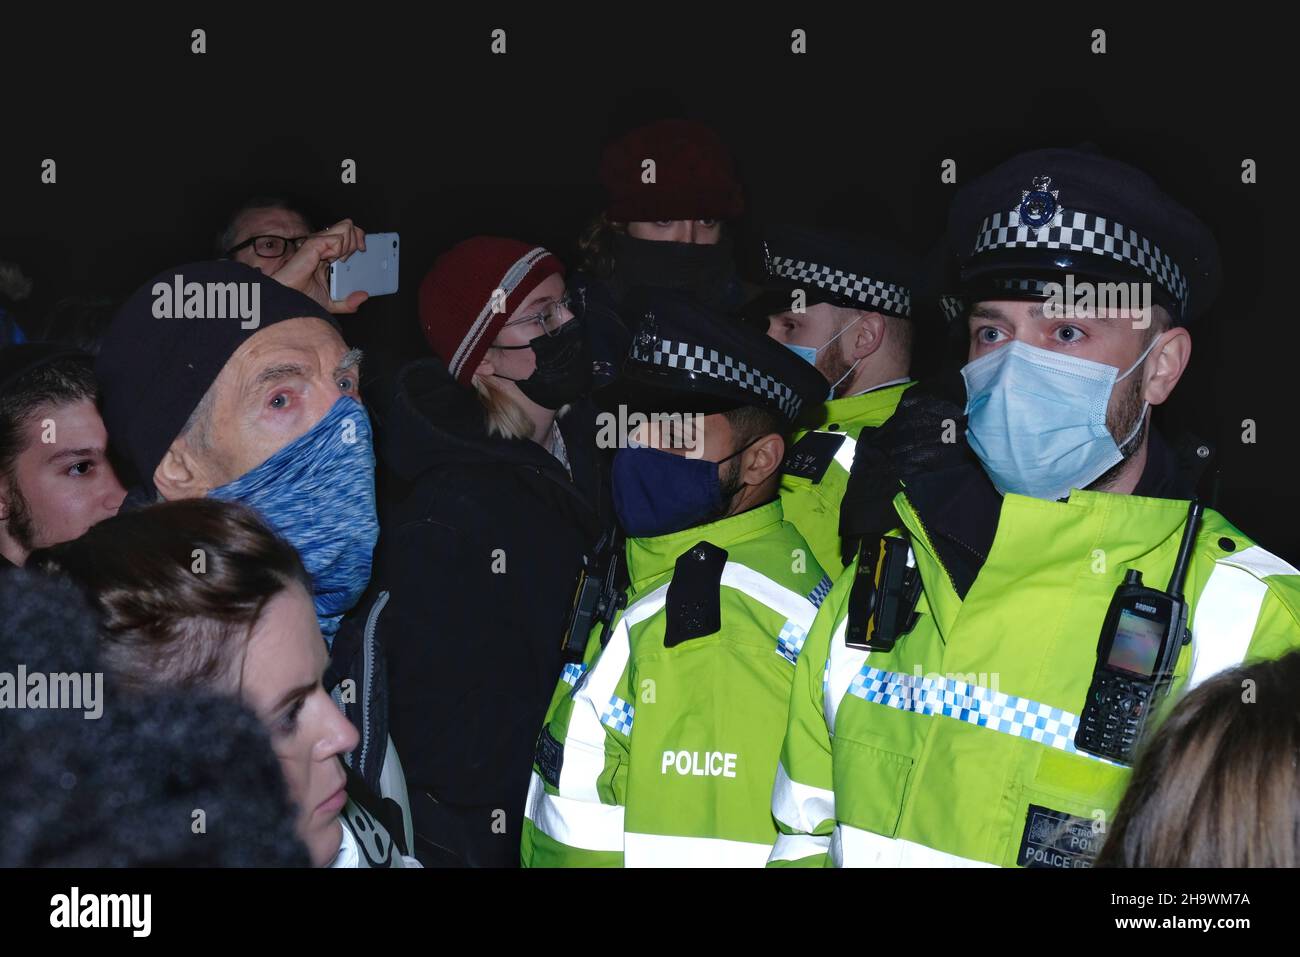 London, UK, 8th Dec, 2021, 'Kill the Bill' protesters and police officers wear facemasks as newly discovered Omricon variant poses a risk as cases increase in the UK. Facemasks in indoor settings becomes mandatory from Friday. The third reading of the Police, Crime, Sentencing and Courts Bill (PCSC) was underway in the House of Lords. The new legislation, if passed, will grant police additional powers to crack-down on protest by allowing stop-and-search and the breaking-up of demonstrations deemed as causing 'serious annoyance'. Credit: Eleventh Hour Photography/Alamy Live News Stock Photo